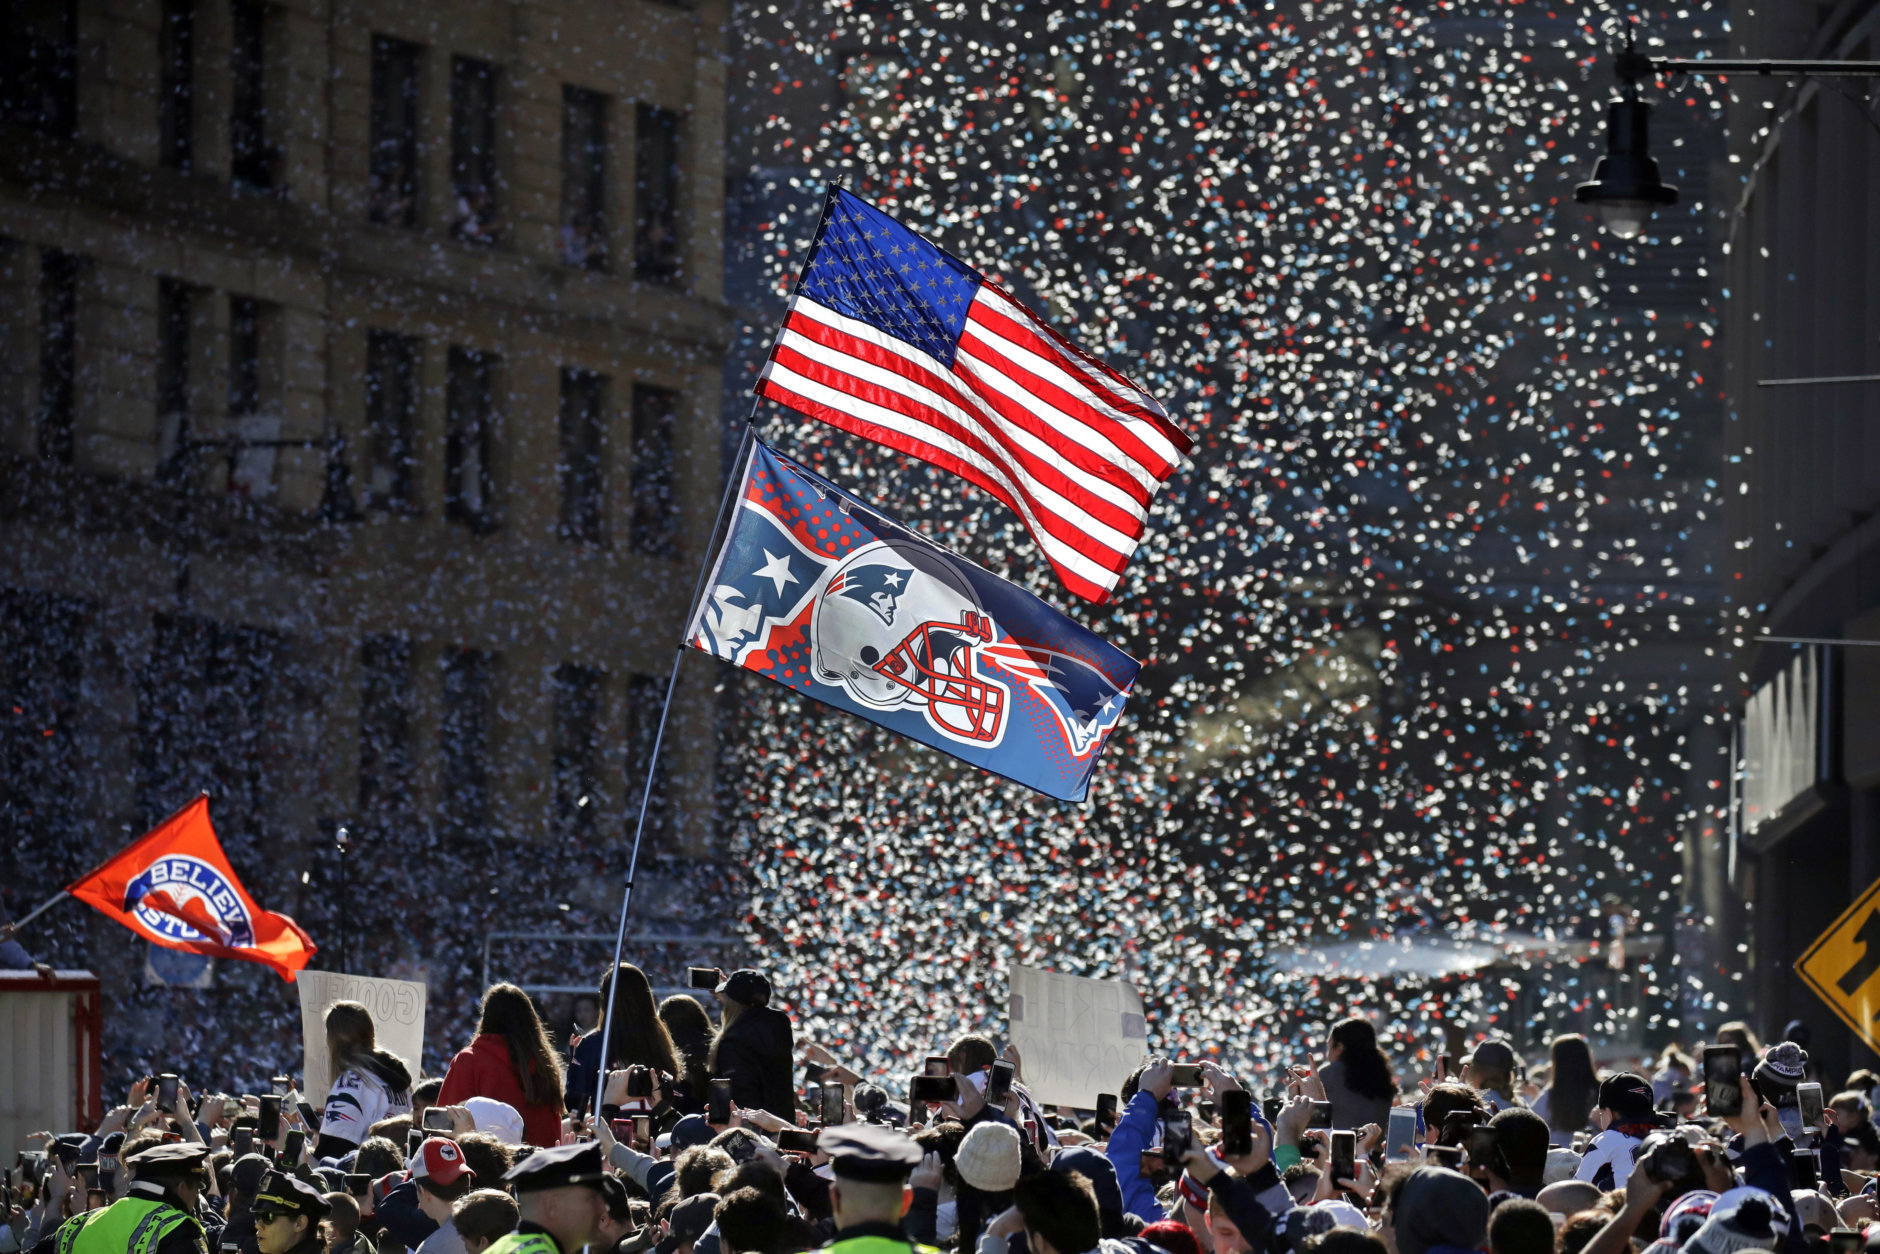 Confetti flies as fans watch the New England Patriots parade through downtown Boston, Tuesday, Feb. 5, 2019, to celebrate their win over the Los Angeles Rams in Sunday's NFL Super Bowl 53 football game in Atlanta. The Patriots have won six Super Bowl championships. (AP Photo/Elise Amendola)